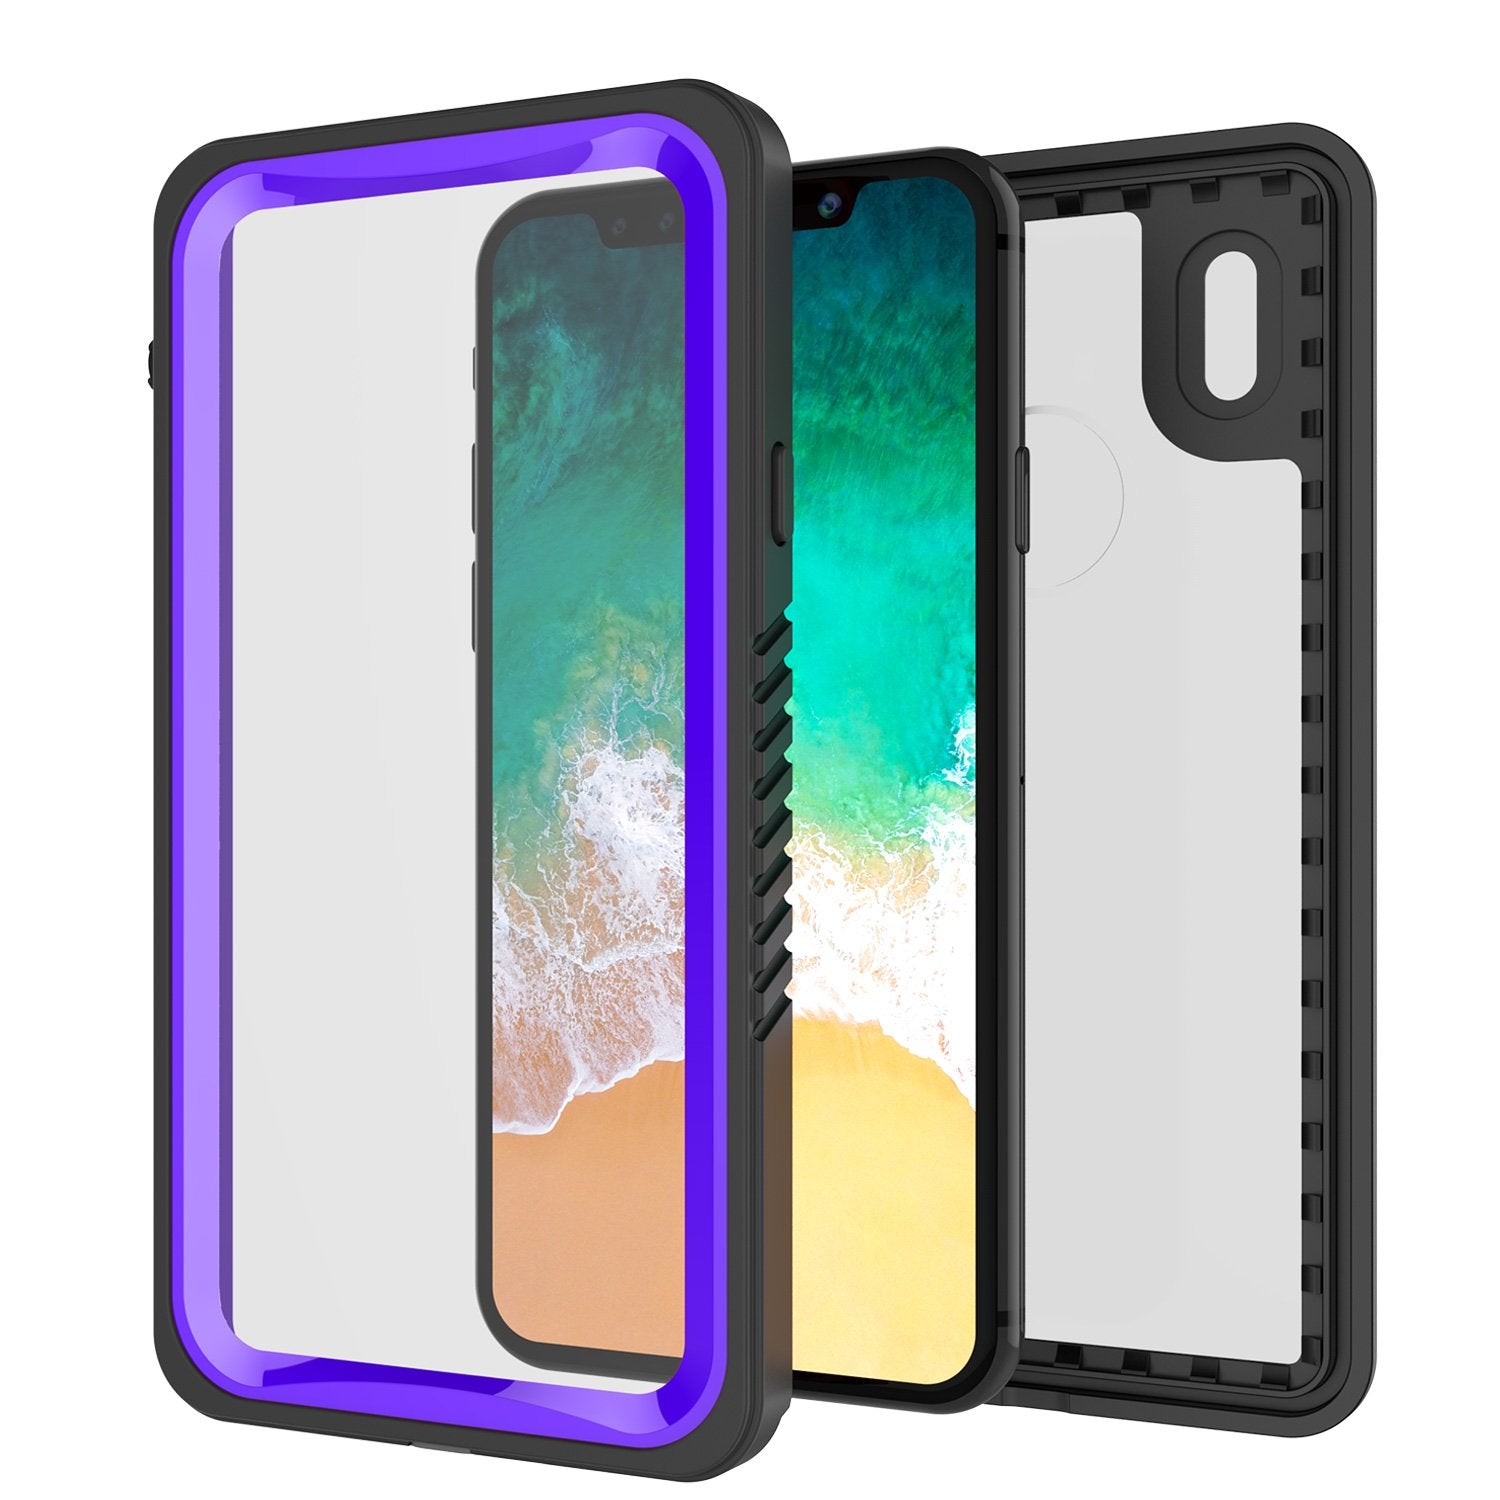 iPhone X Case, Punkcase [Extreme Series] [Slim Fit] [IP68 Certified] [Shockproof] [Snowproof] [Dirproof] Armor Cover W/ Built In Screen Protector for Apple iPhone 10 [PURPLE]